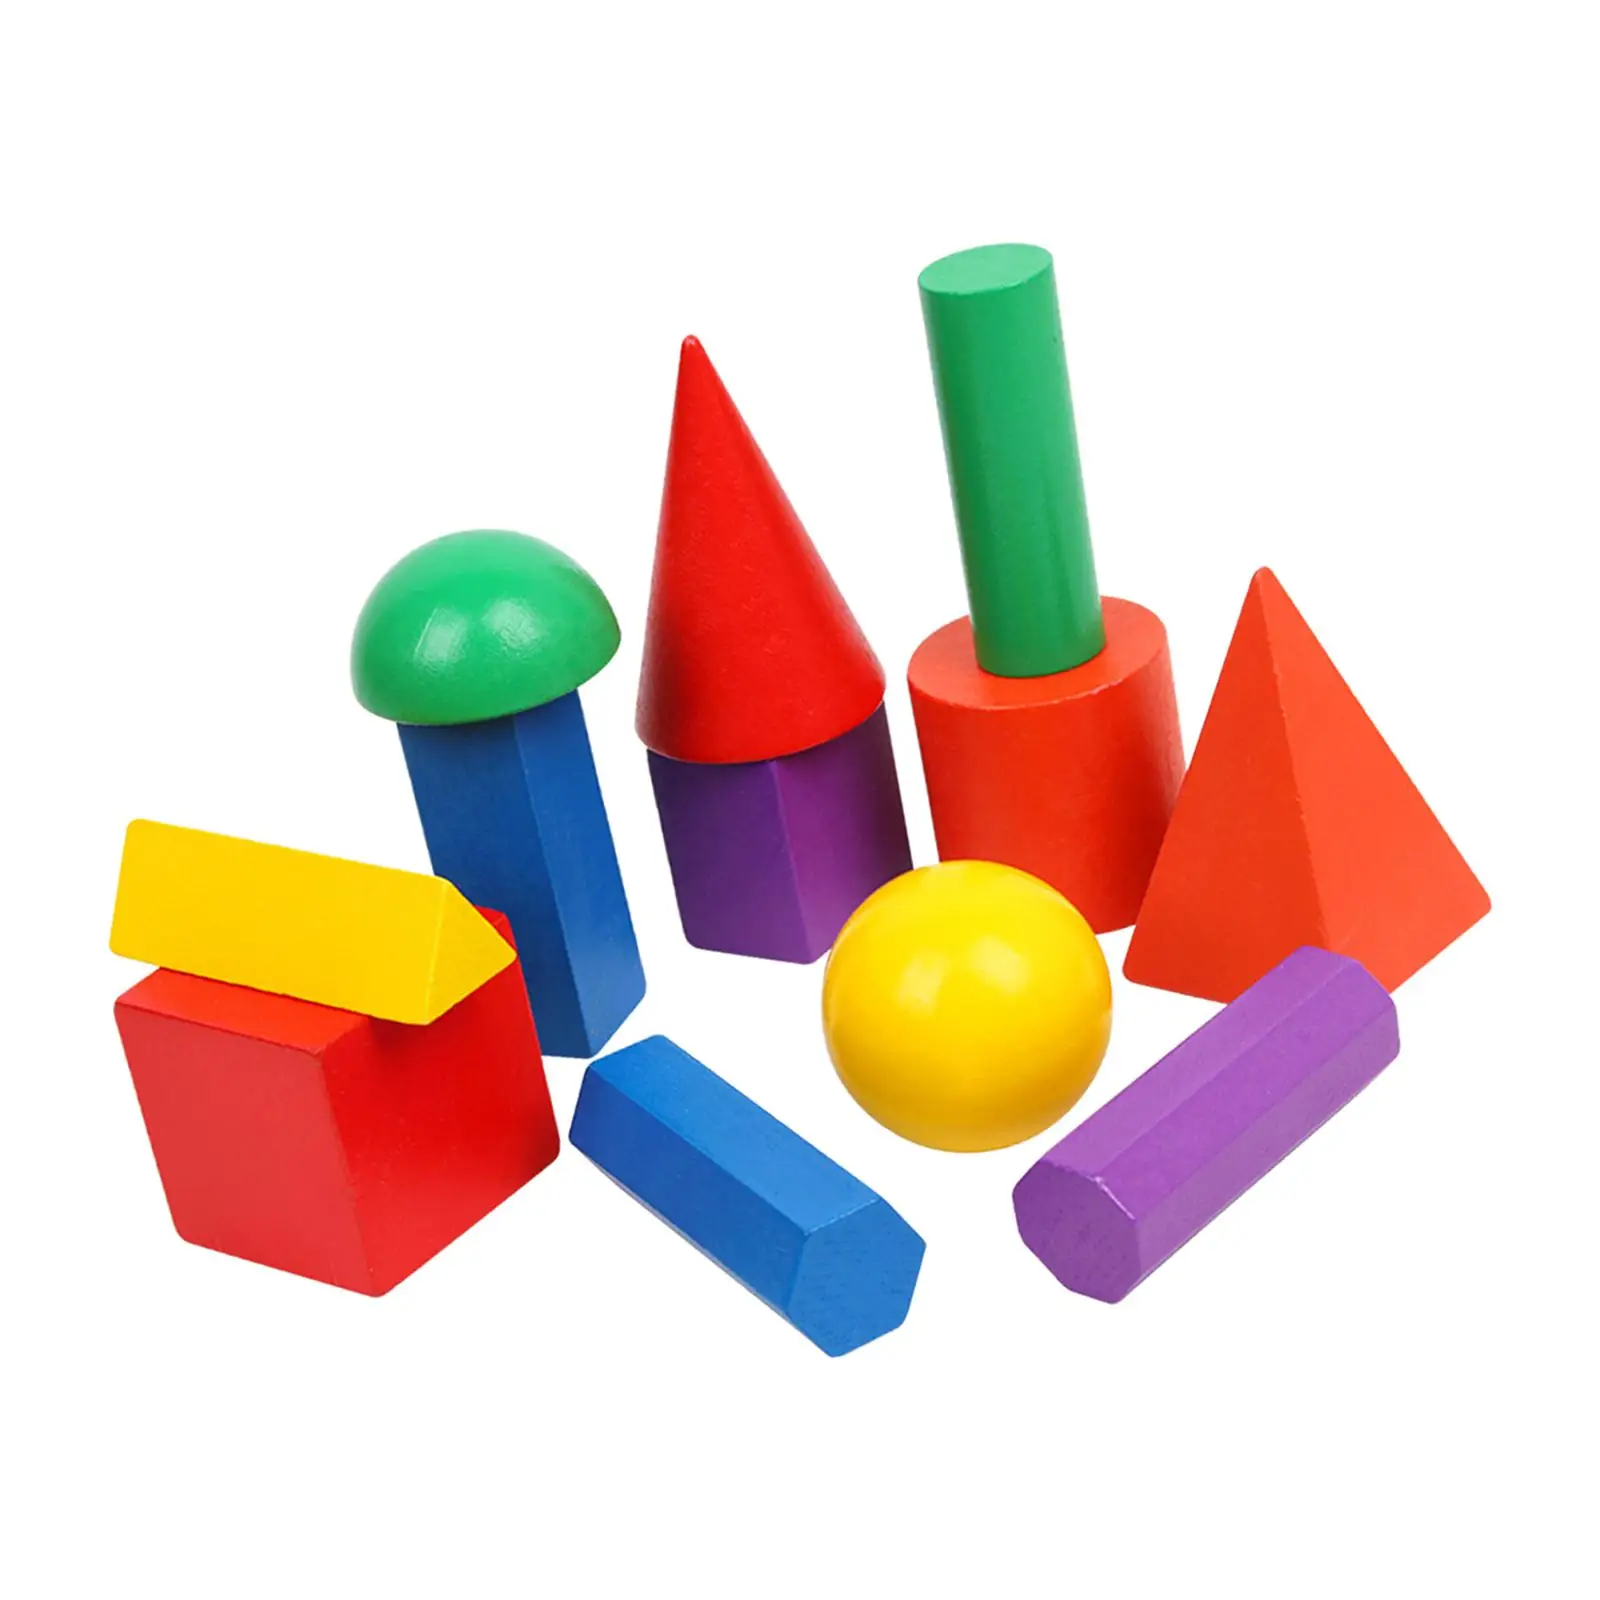 12 Pieces Large Size Pattern Blocks Colorful for Game Shape Sorters Teaching